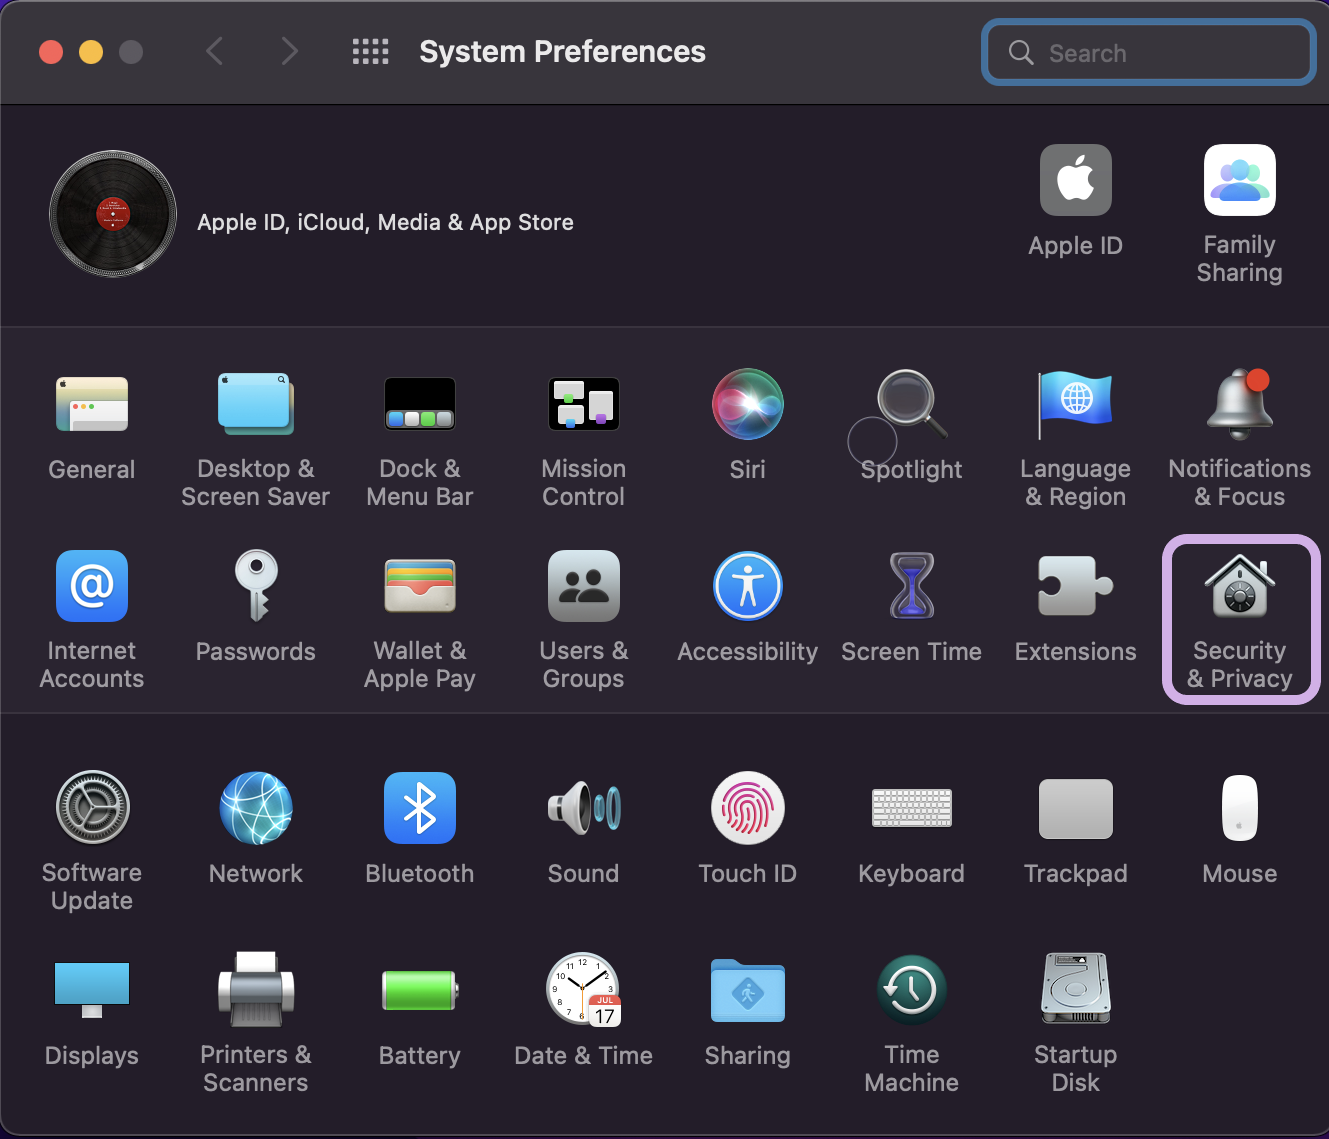 The Security and Privacy icon is highlighted within System Preferences.